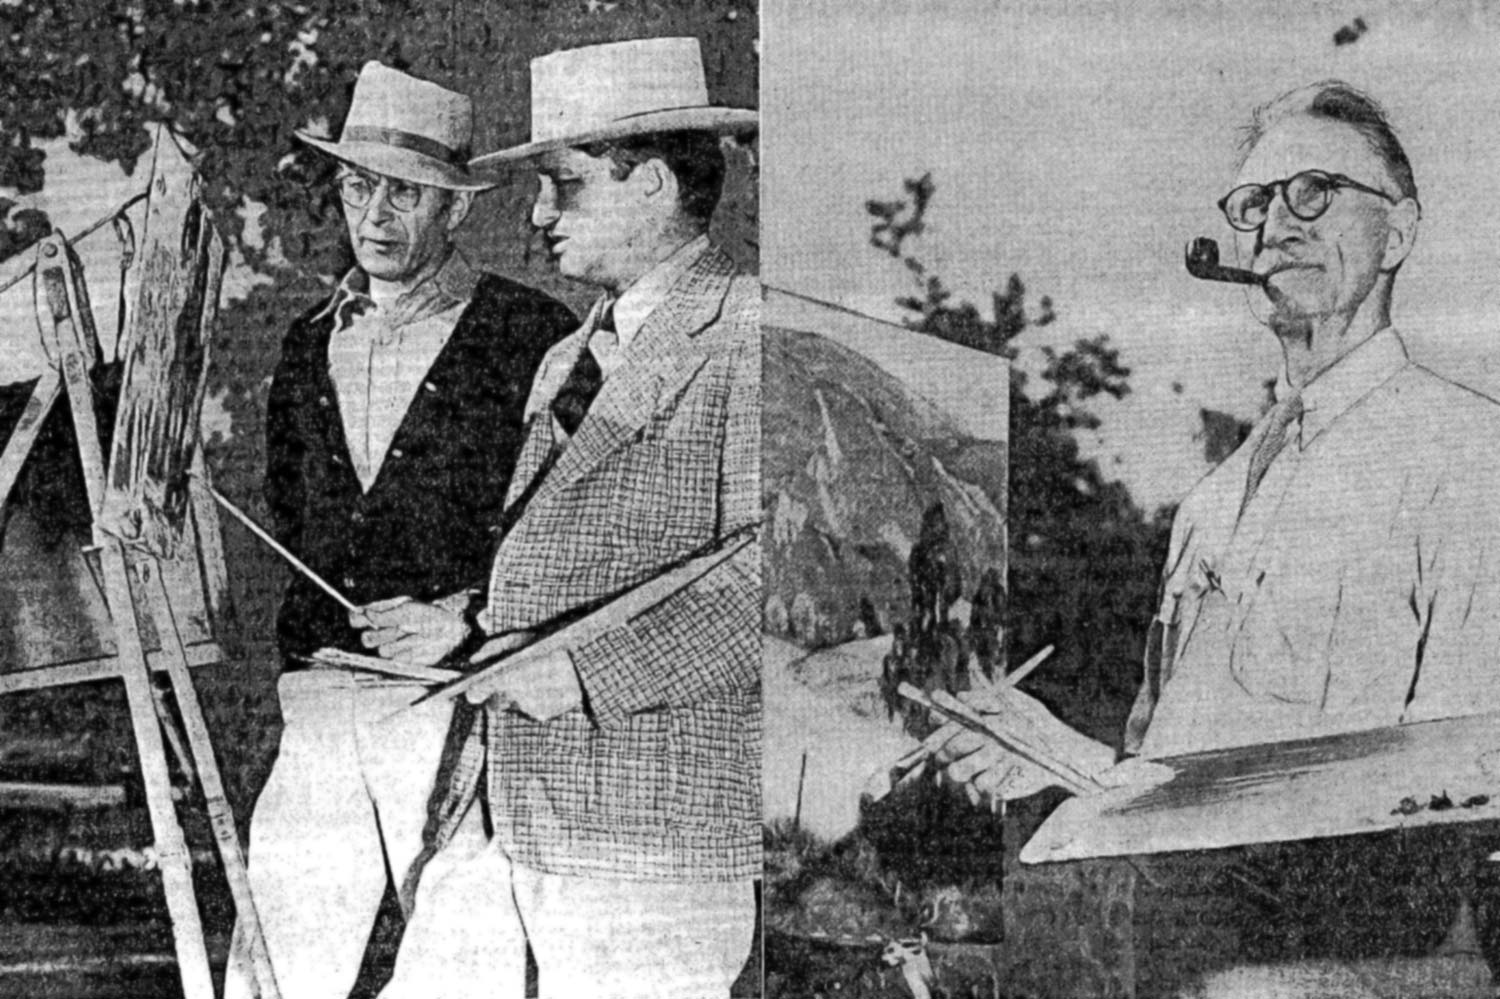  Artists Cornelis Botke, Douglas Shively, and R.P. Smith prepare for the first Santa Paula Art Show in 1937. 